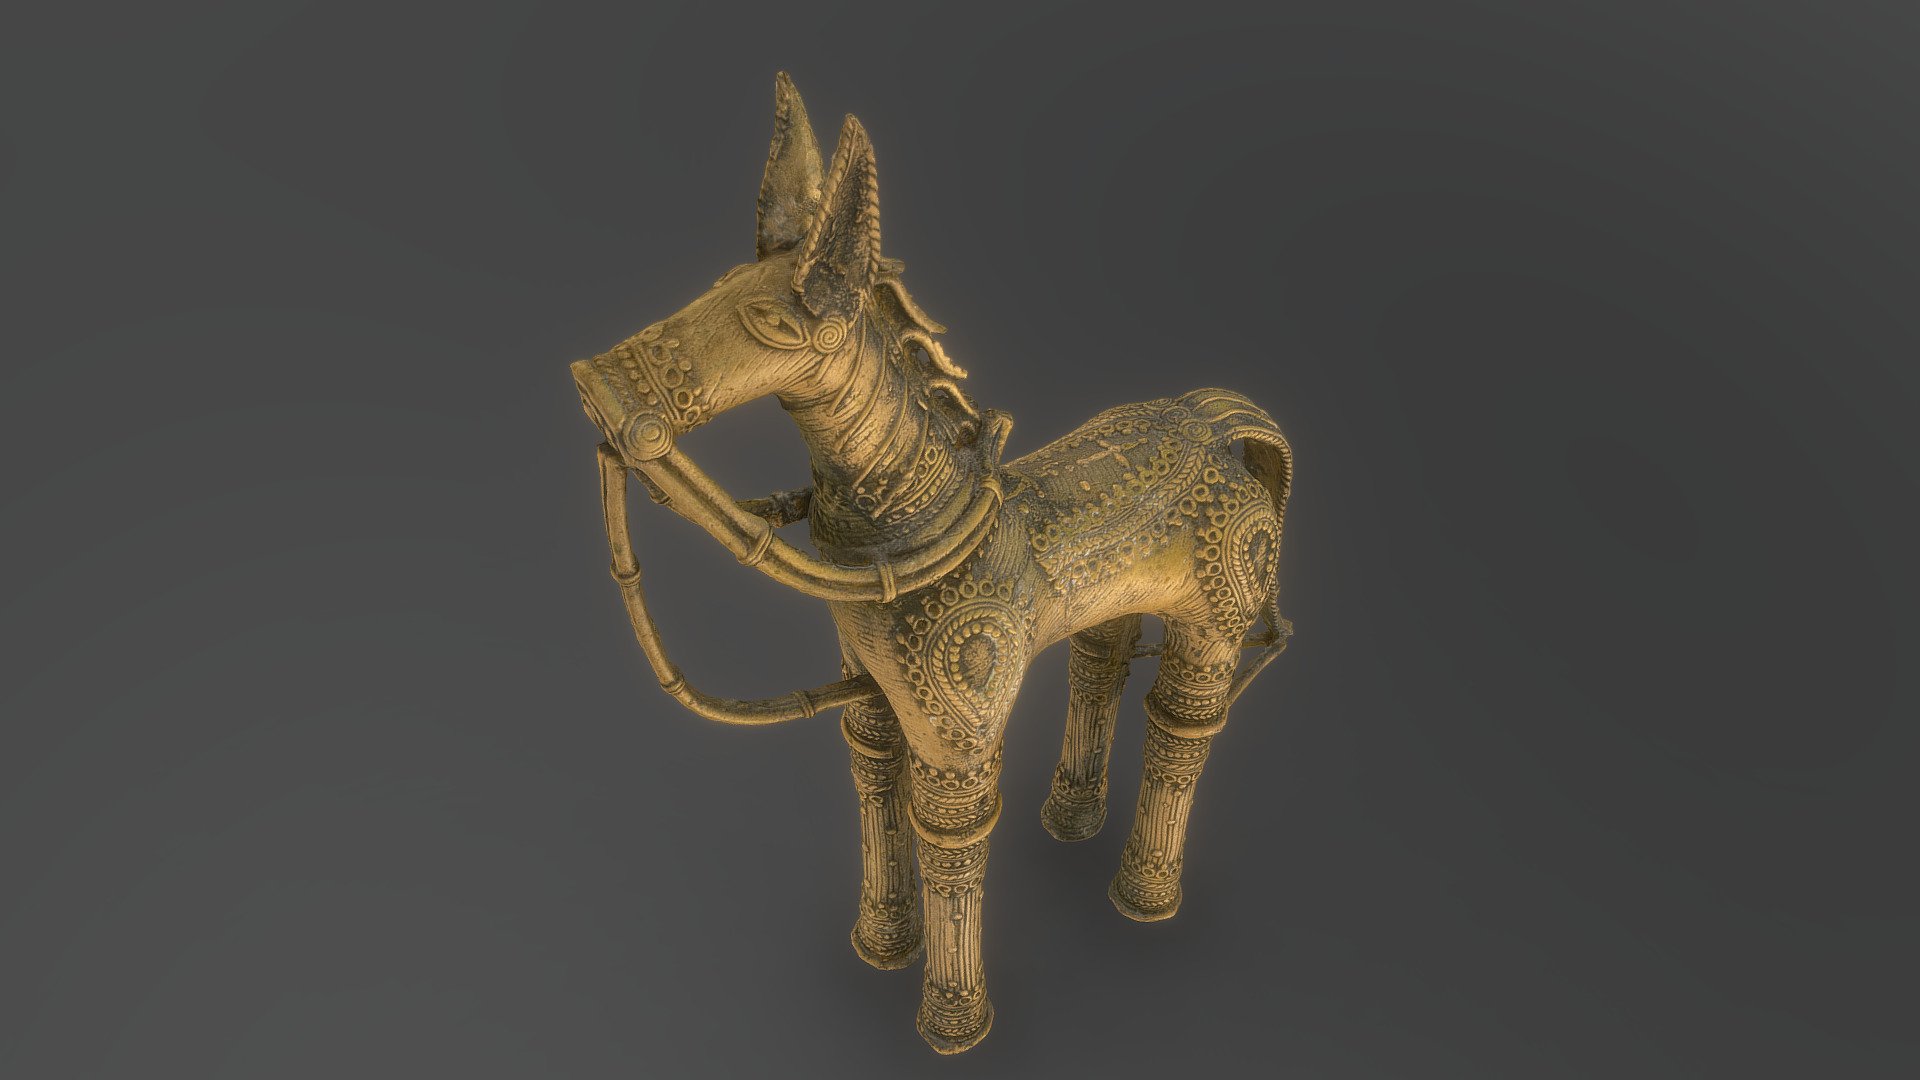 Metalwork horse figurine statue, a souvenir from my India 2013 trip

Photogrammetry scan 120x24MP


SouvenirsChallenge - Metal horse figurine - Buy Royalty Free 3D model by matousekfoto 3d model